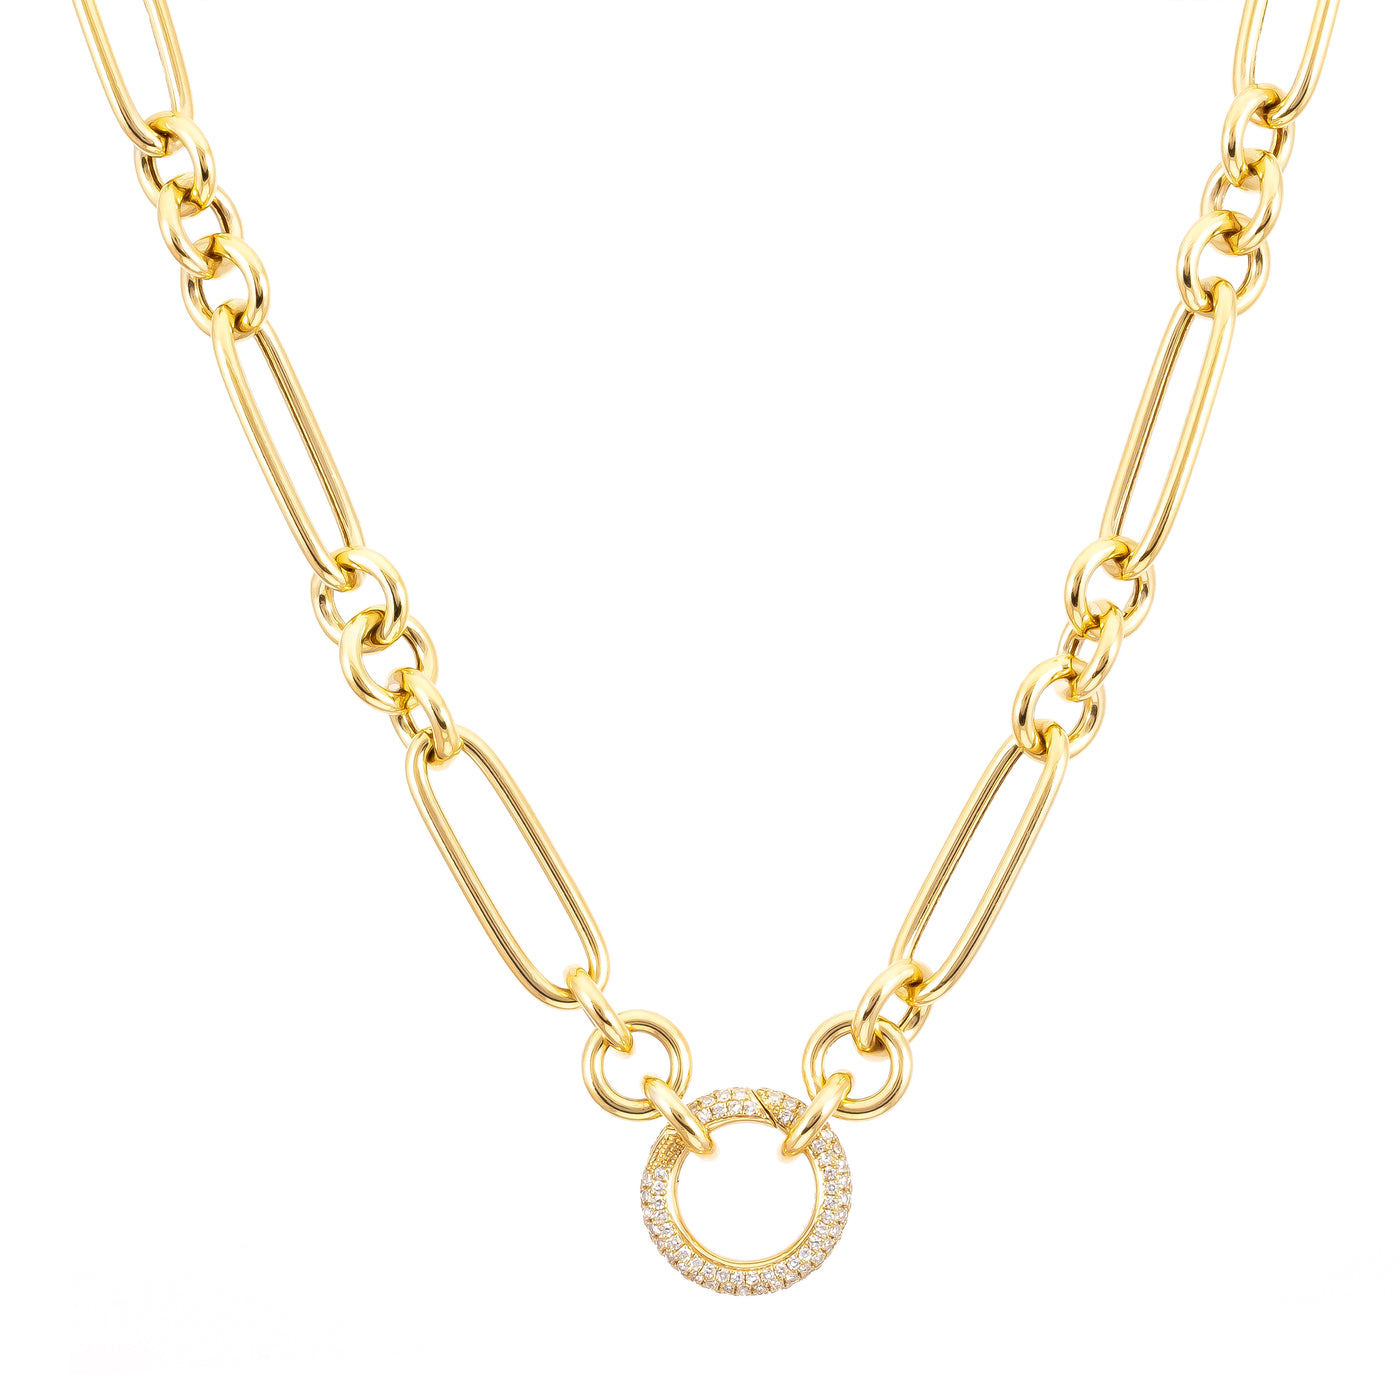 Mixed Link Chain with Round Diamond Enhancer